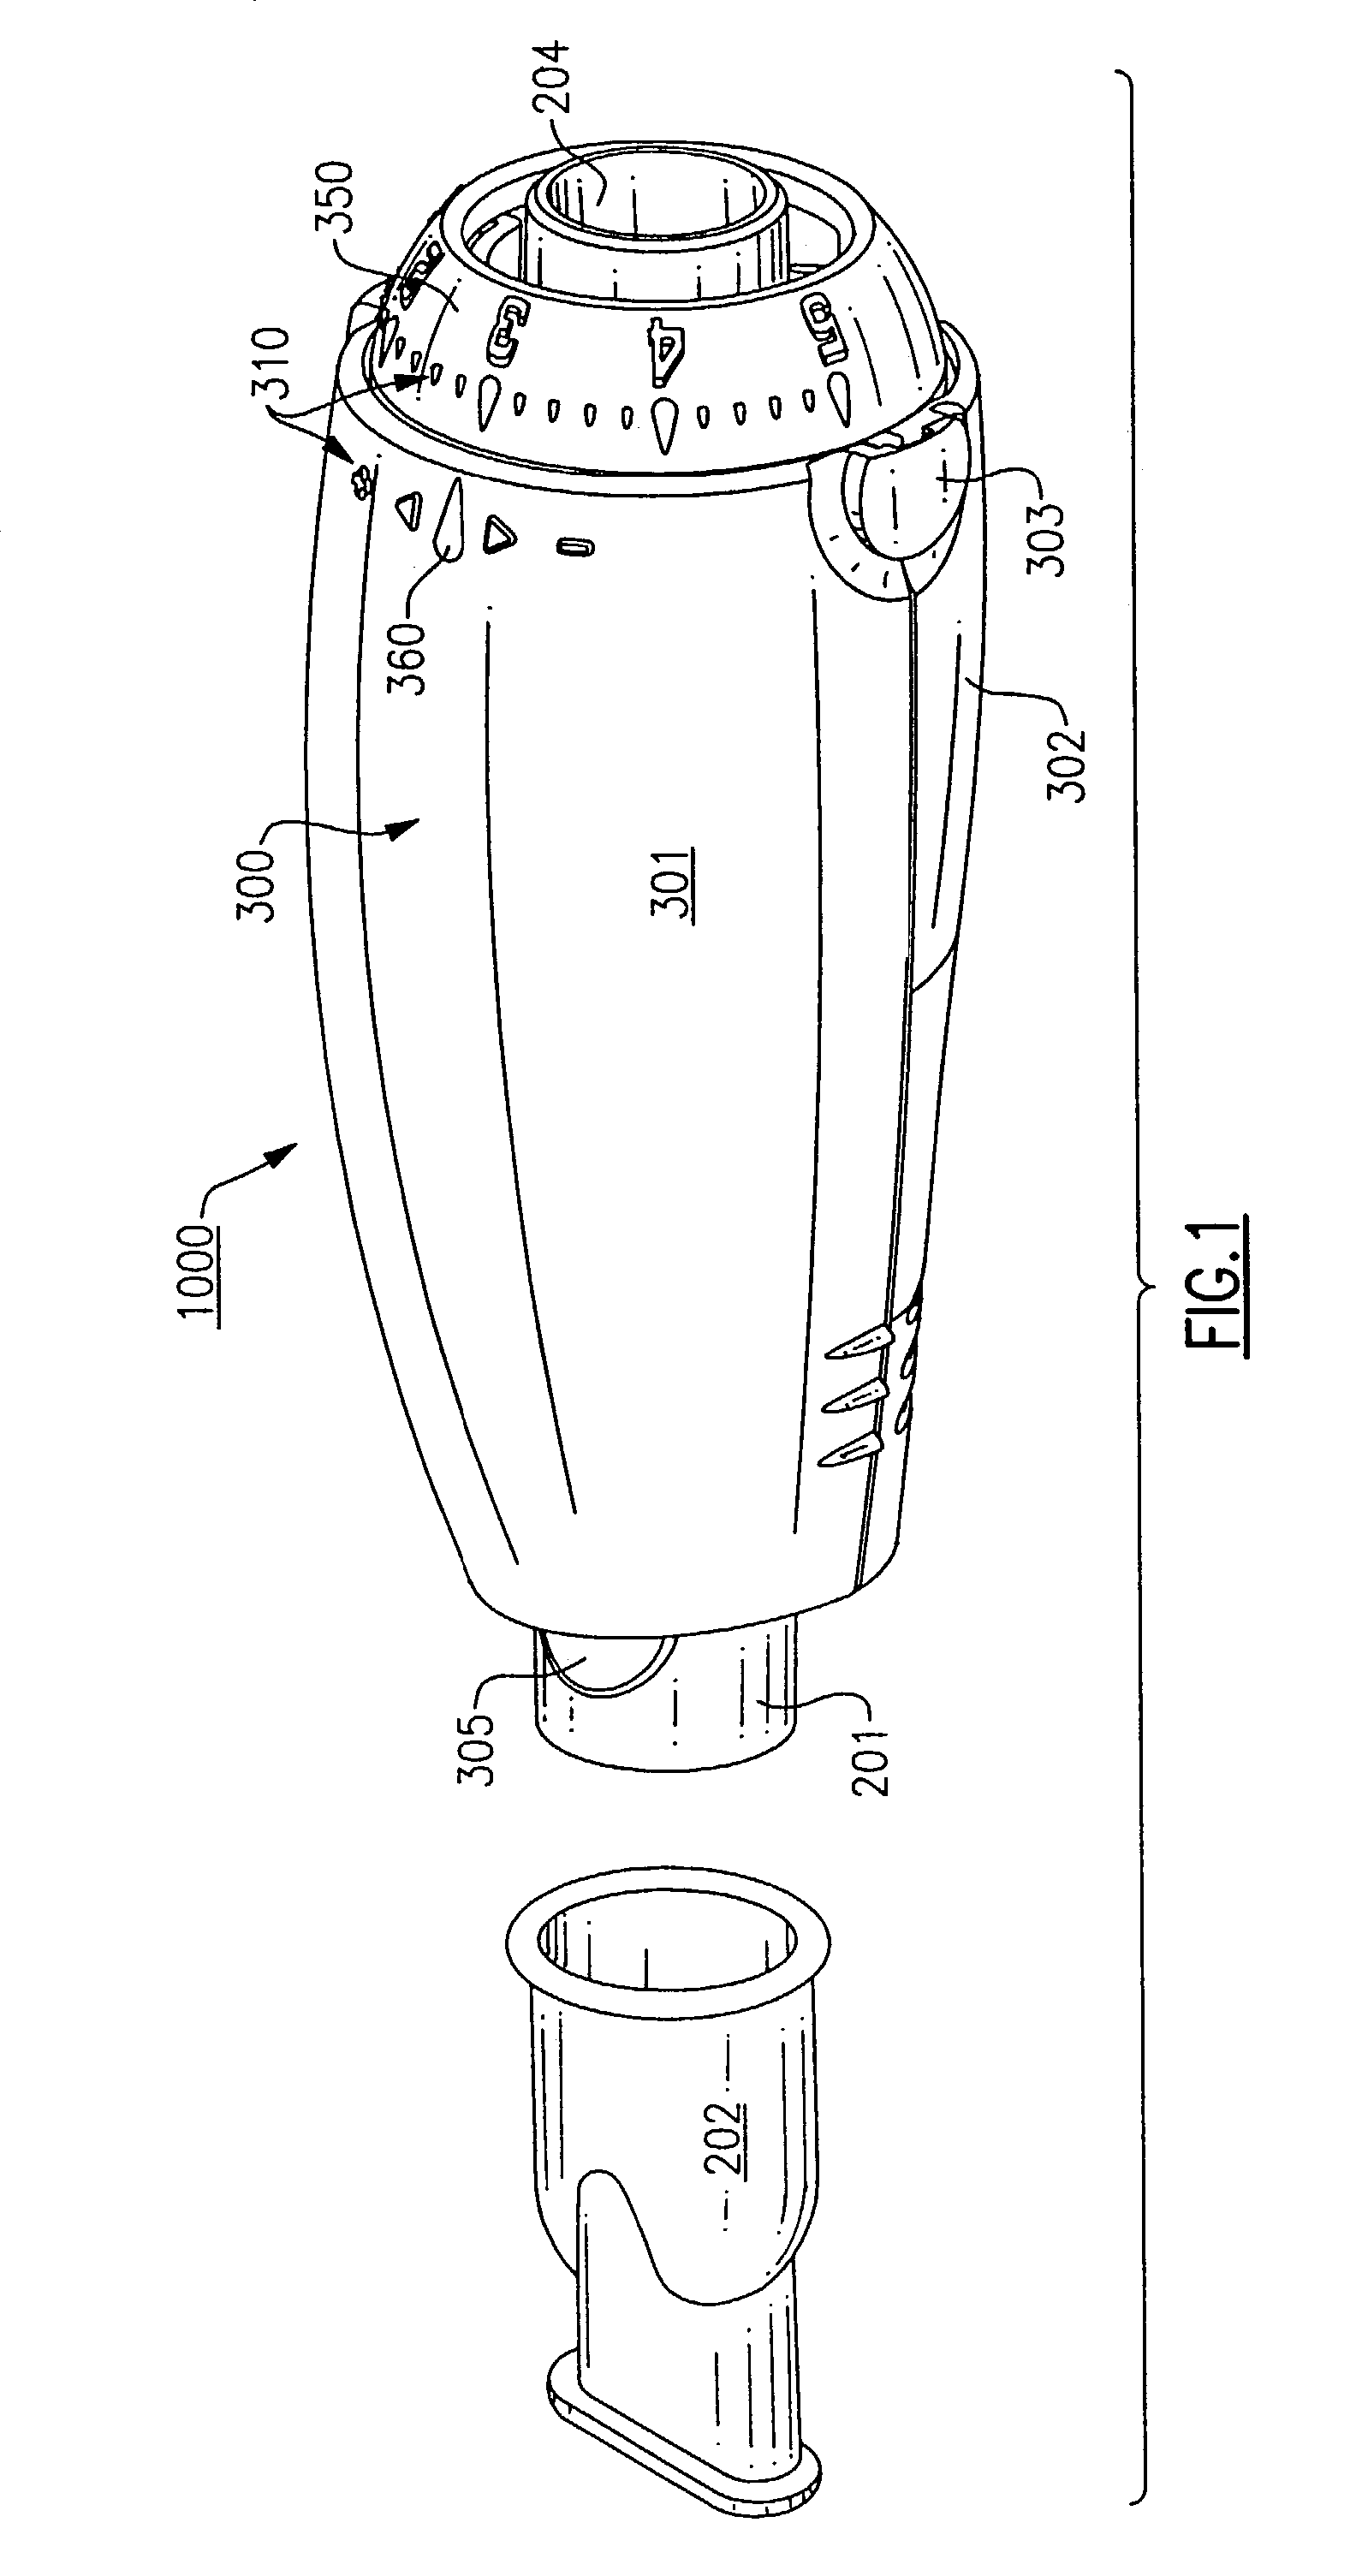 Positive expiratory pressure device with bypass